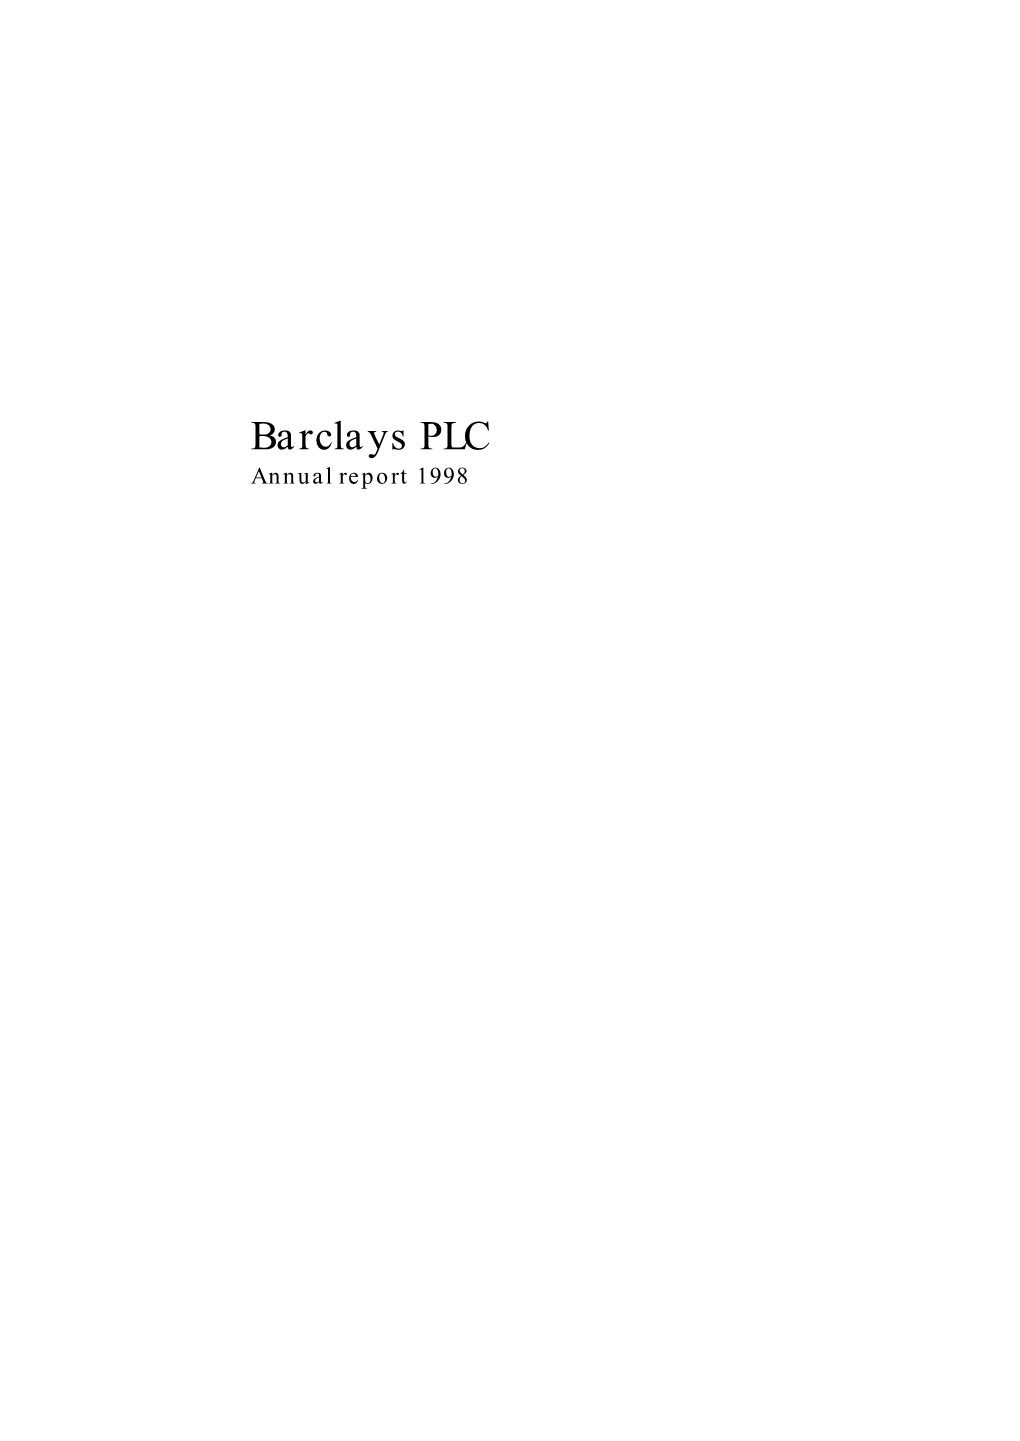 Barclays PLC 1998 Annual Report